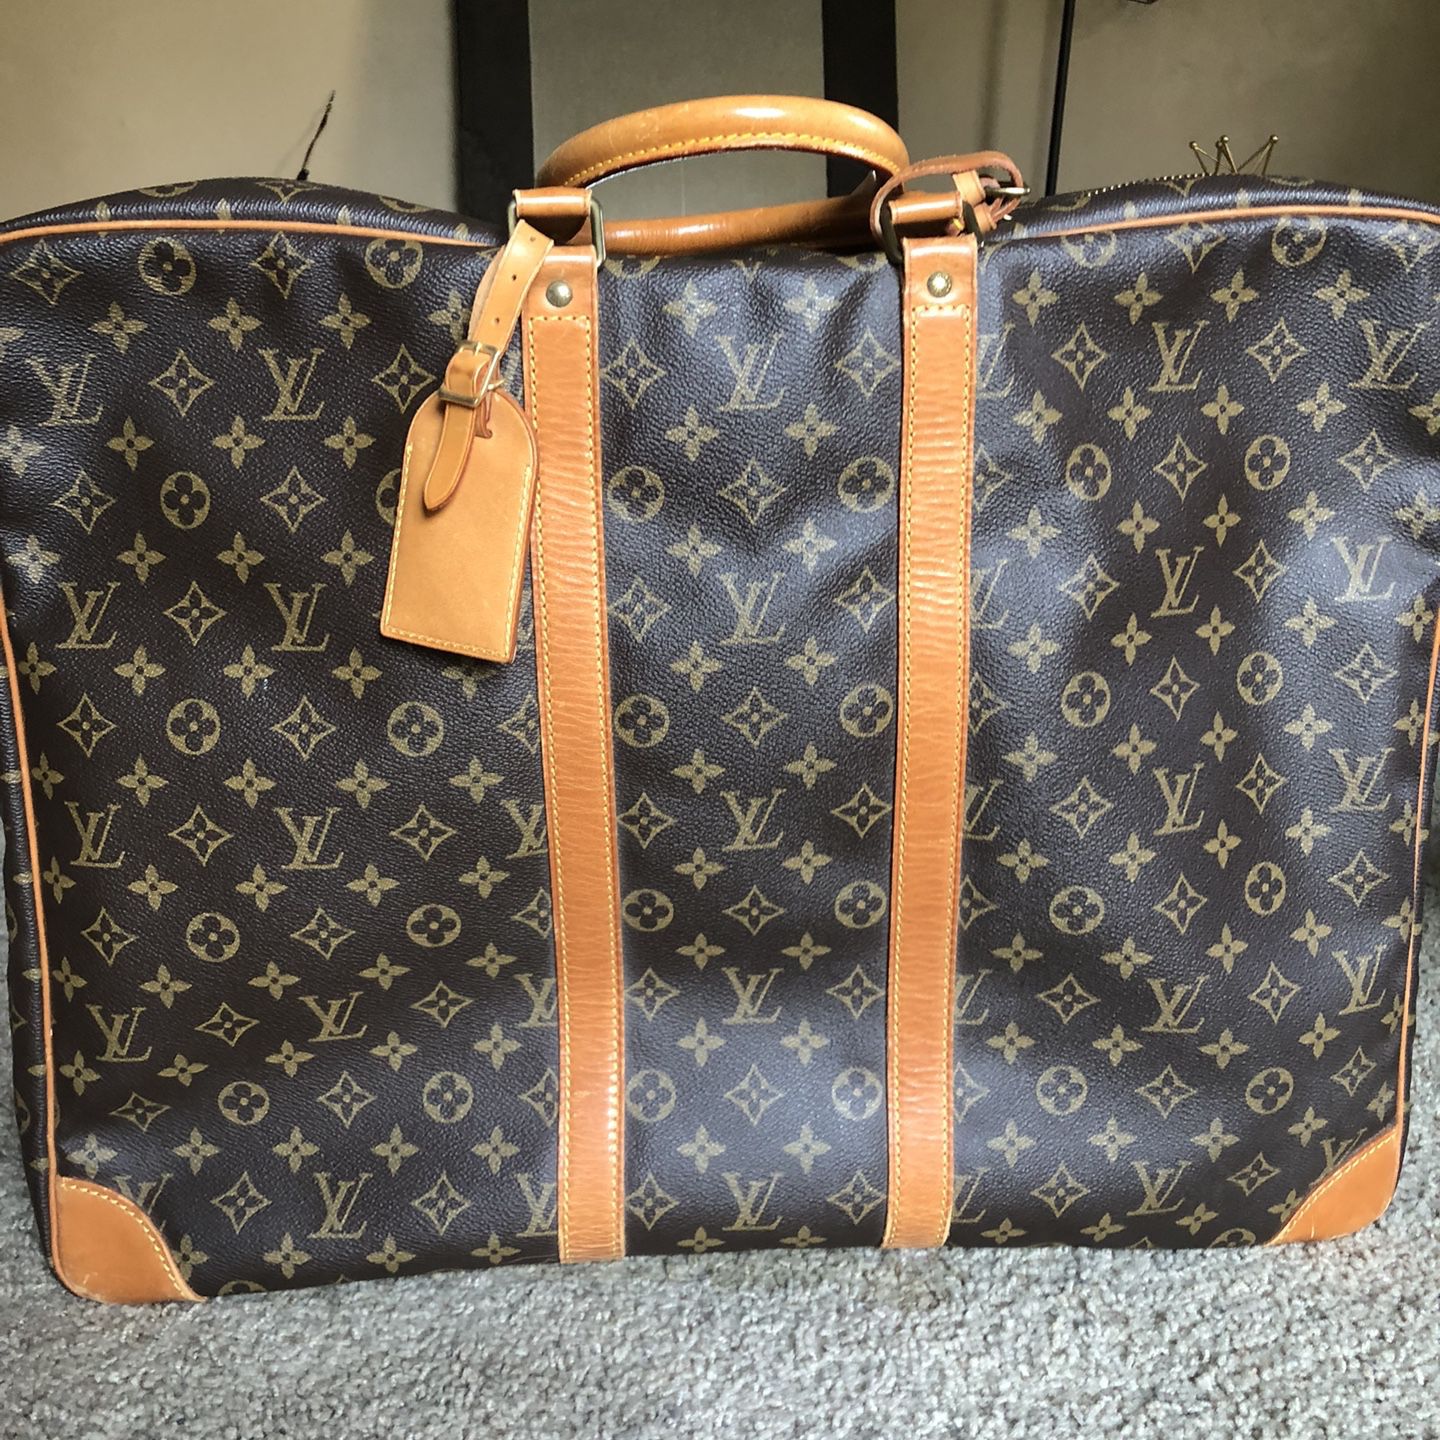 Louis Vuitton Sirius 55 for Sale in San Diego, CA - OfferUp